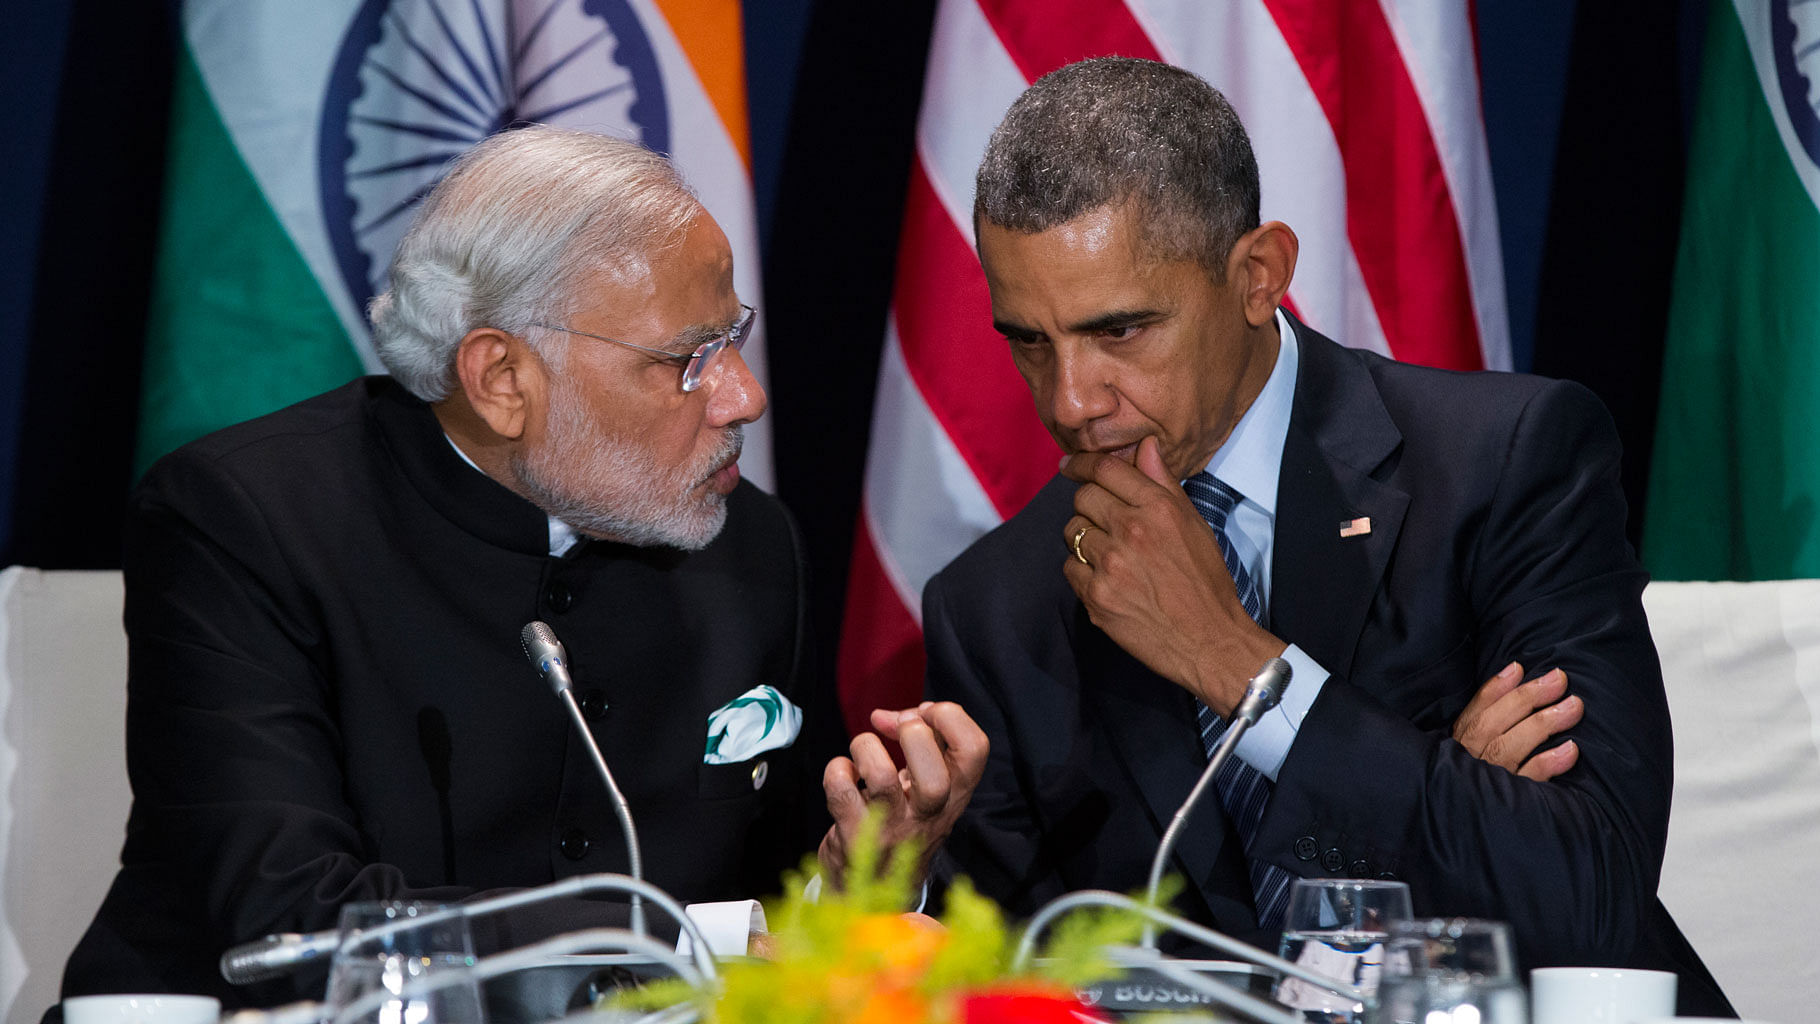 US President Obama with Prime Minister Narendra Modi just before the joint press meet. Image used for representational purpose only.